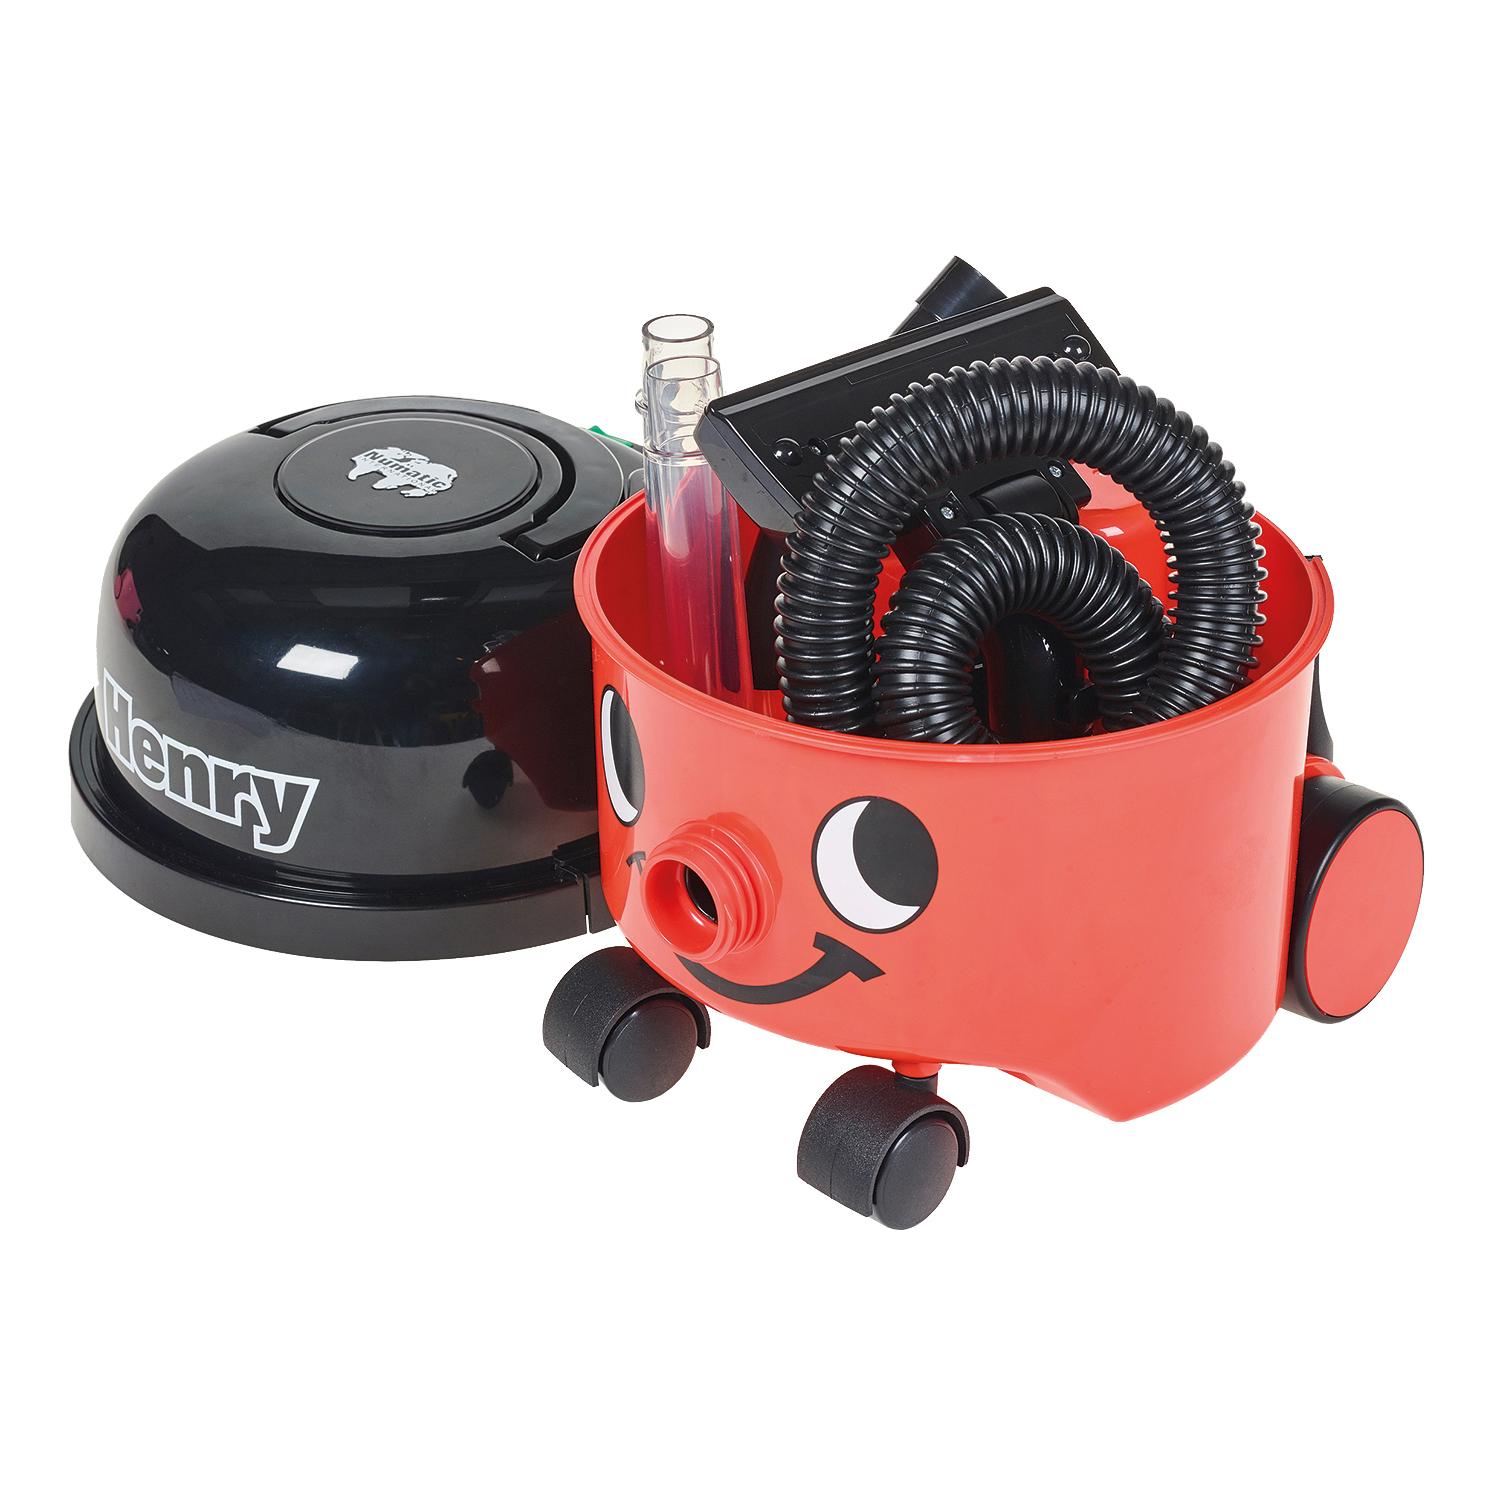 Henry Vacuum Toy with Accessories